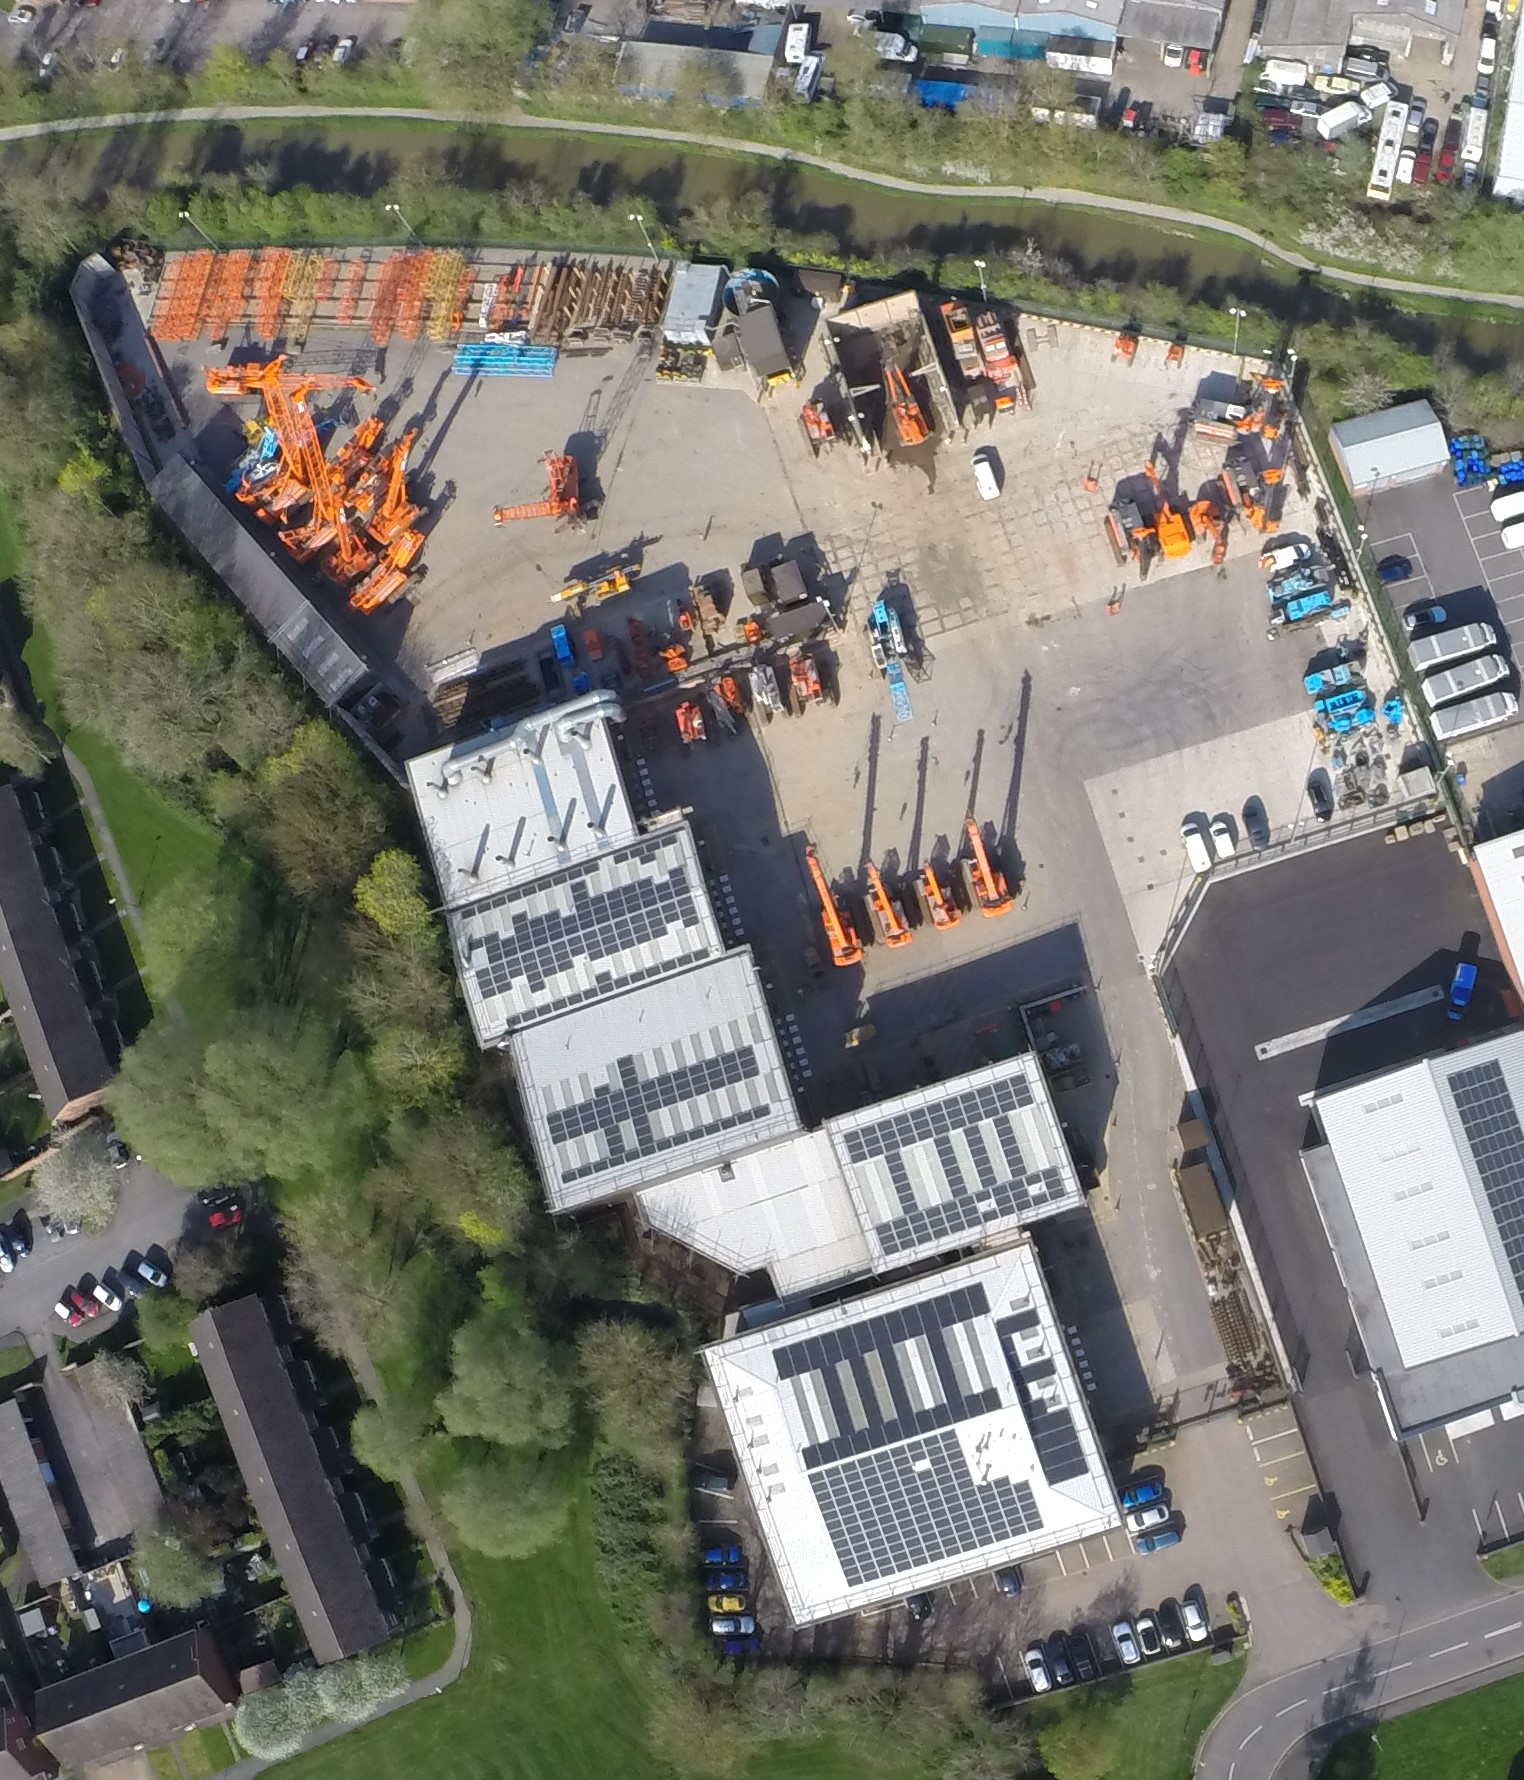 AGD Equipment's premises from above